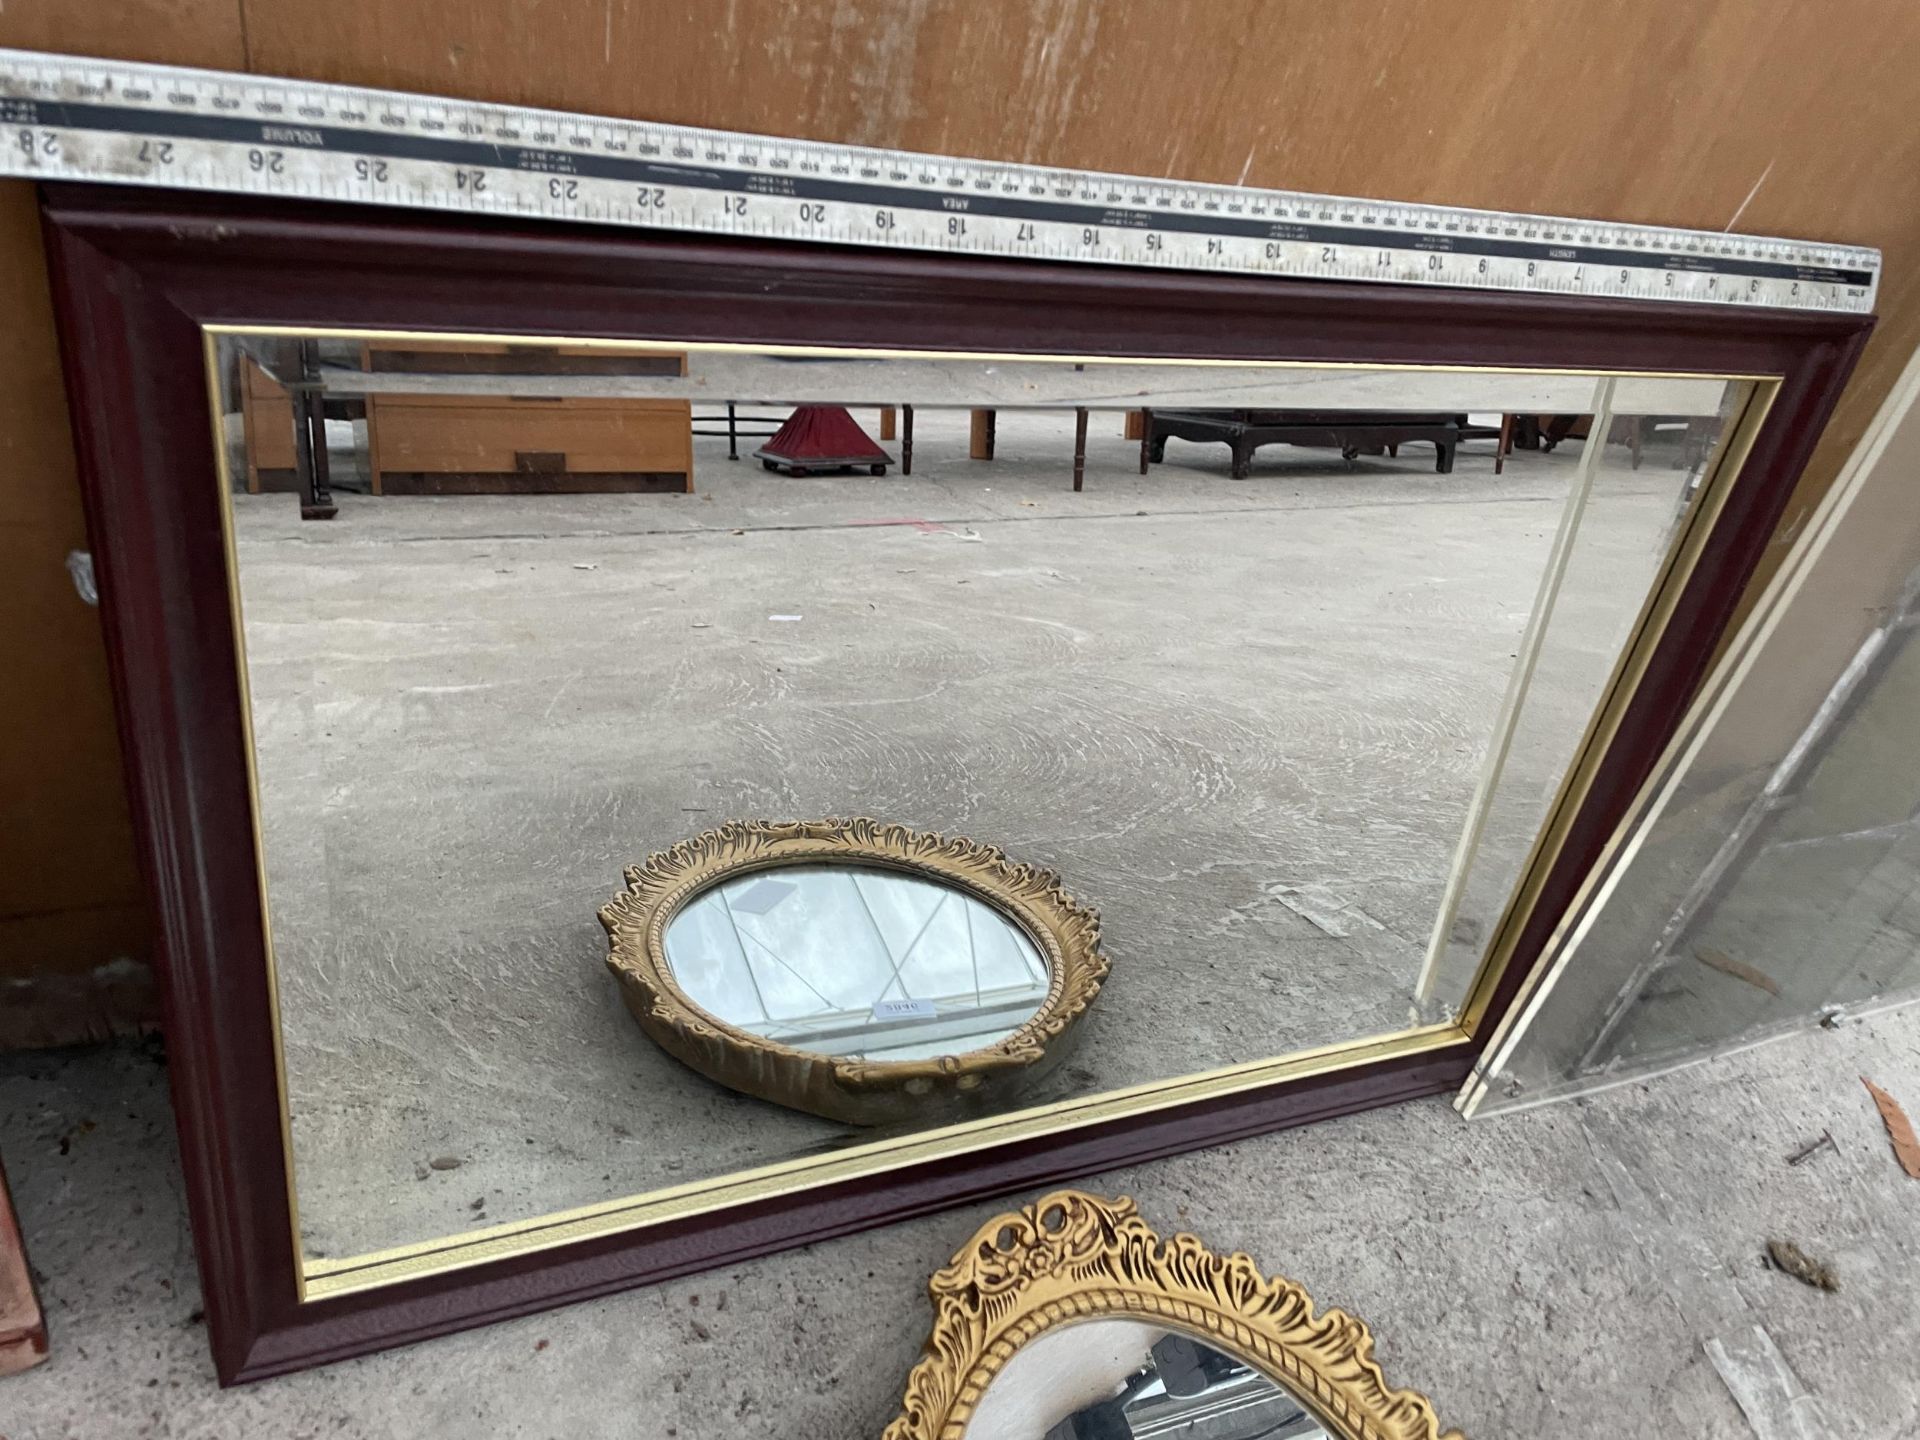 AN OVAL GILT FRAMED WALL MIRROR AND WOODEN FRAMED MIRROR - Image 5 of 7